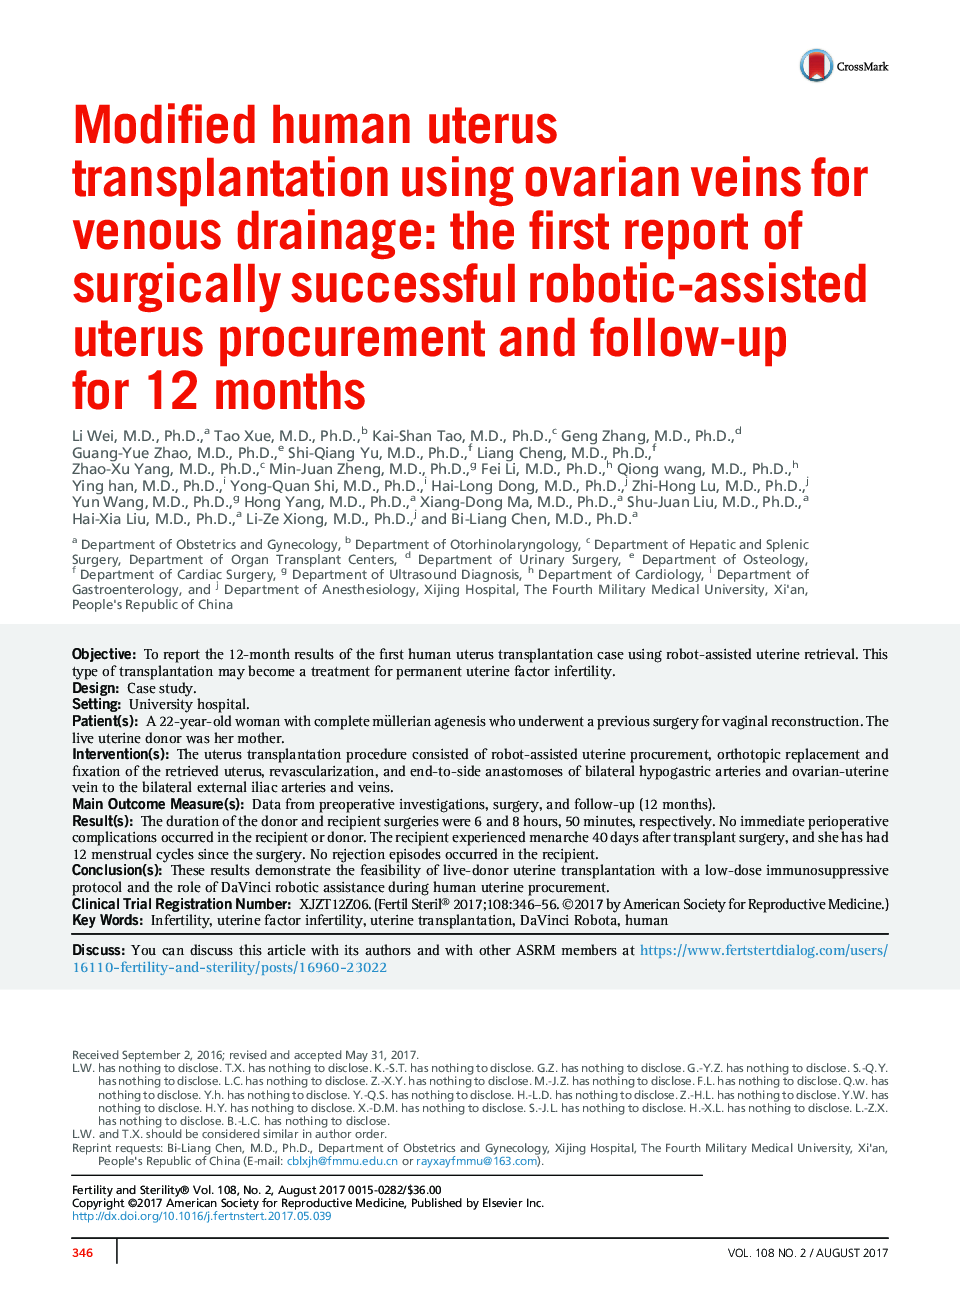 Modified human uterus transplantation using ovarian veins for venous drainage: the first report of surgically successful robotic-assisted uterus procurement and follow-up for 12Â months